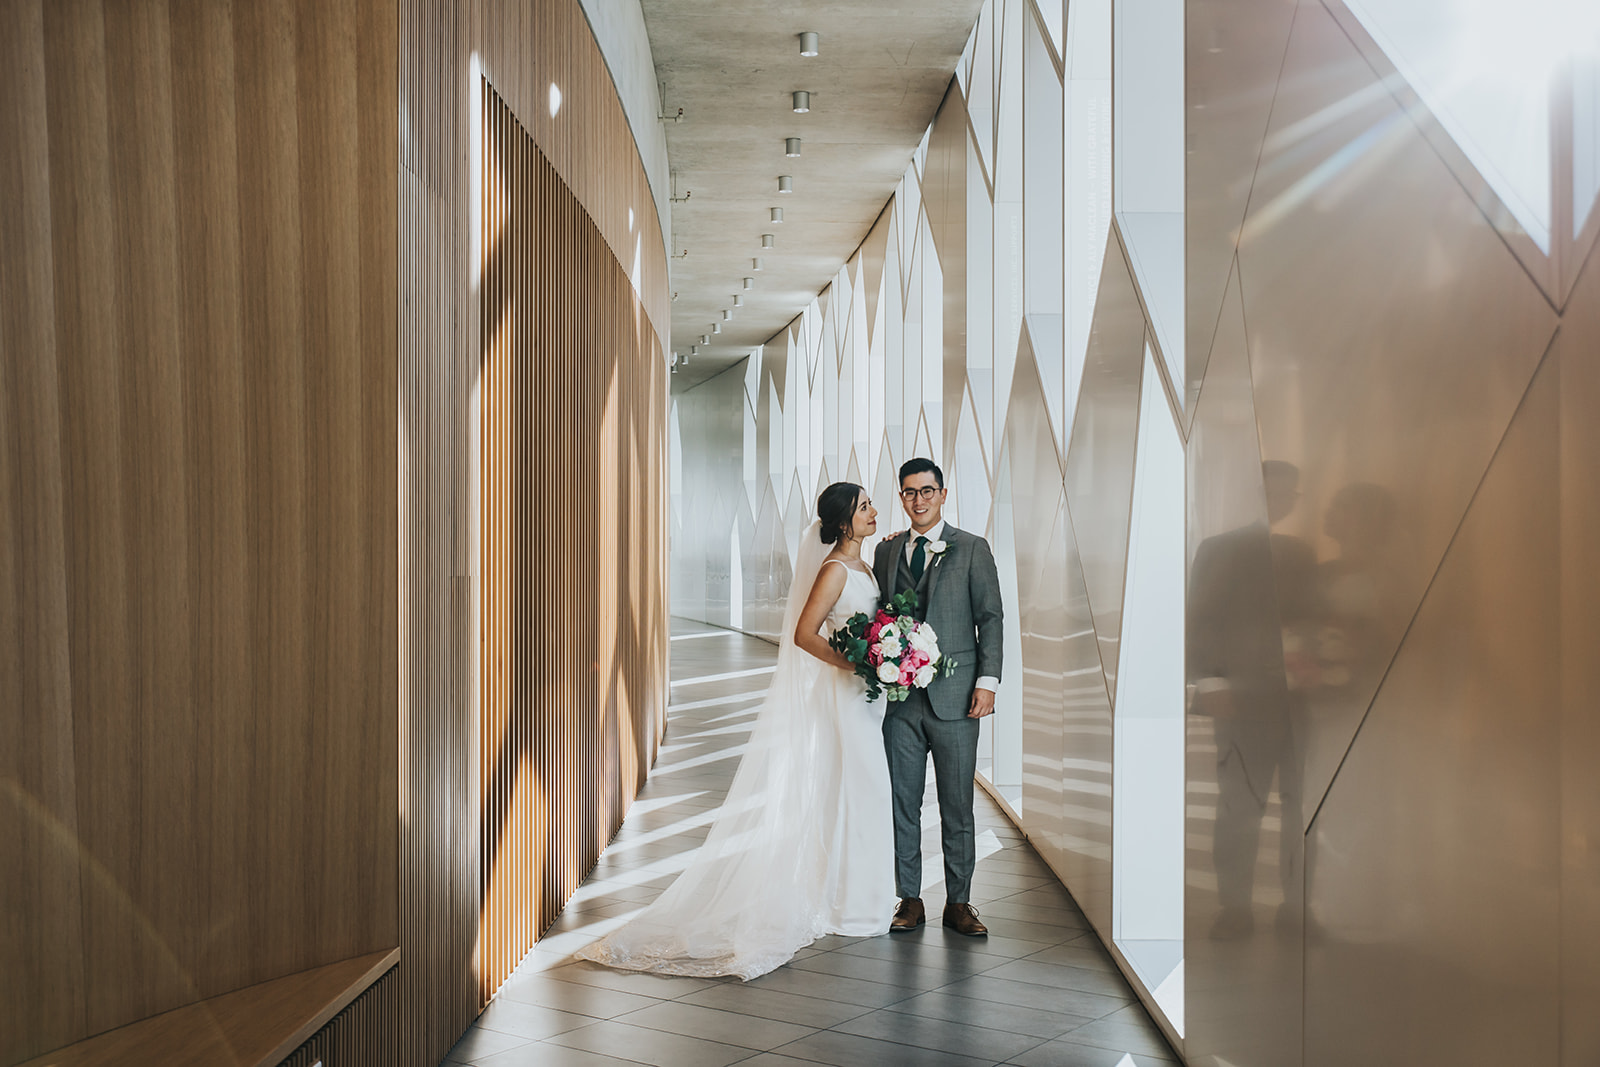 Andrea and Junho's Winter Wedding: A Modern Celebration at The Brownstone